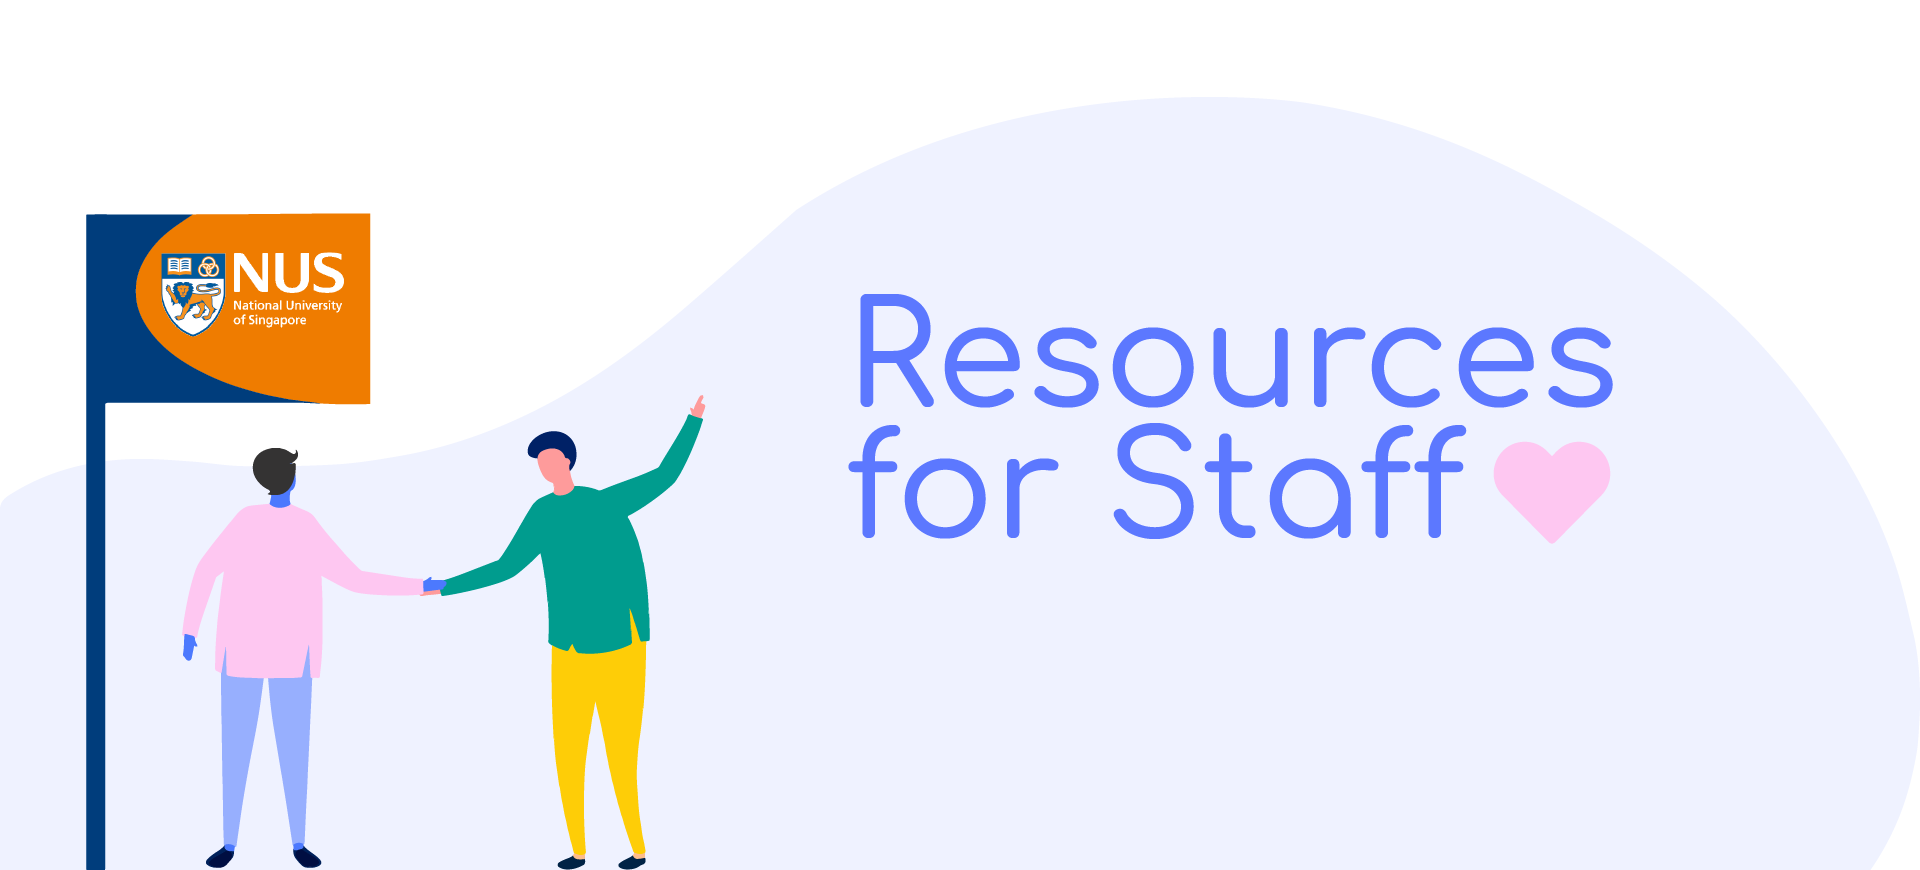 Resources for staff